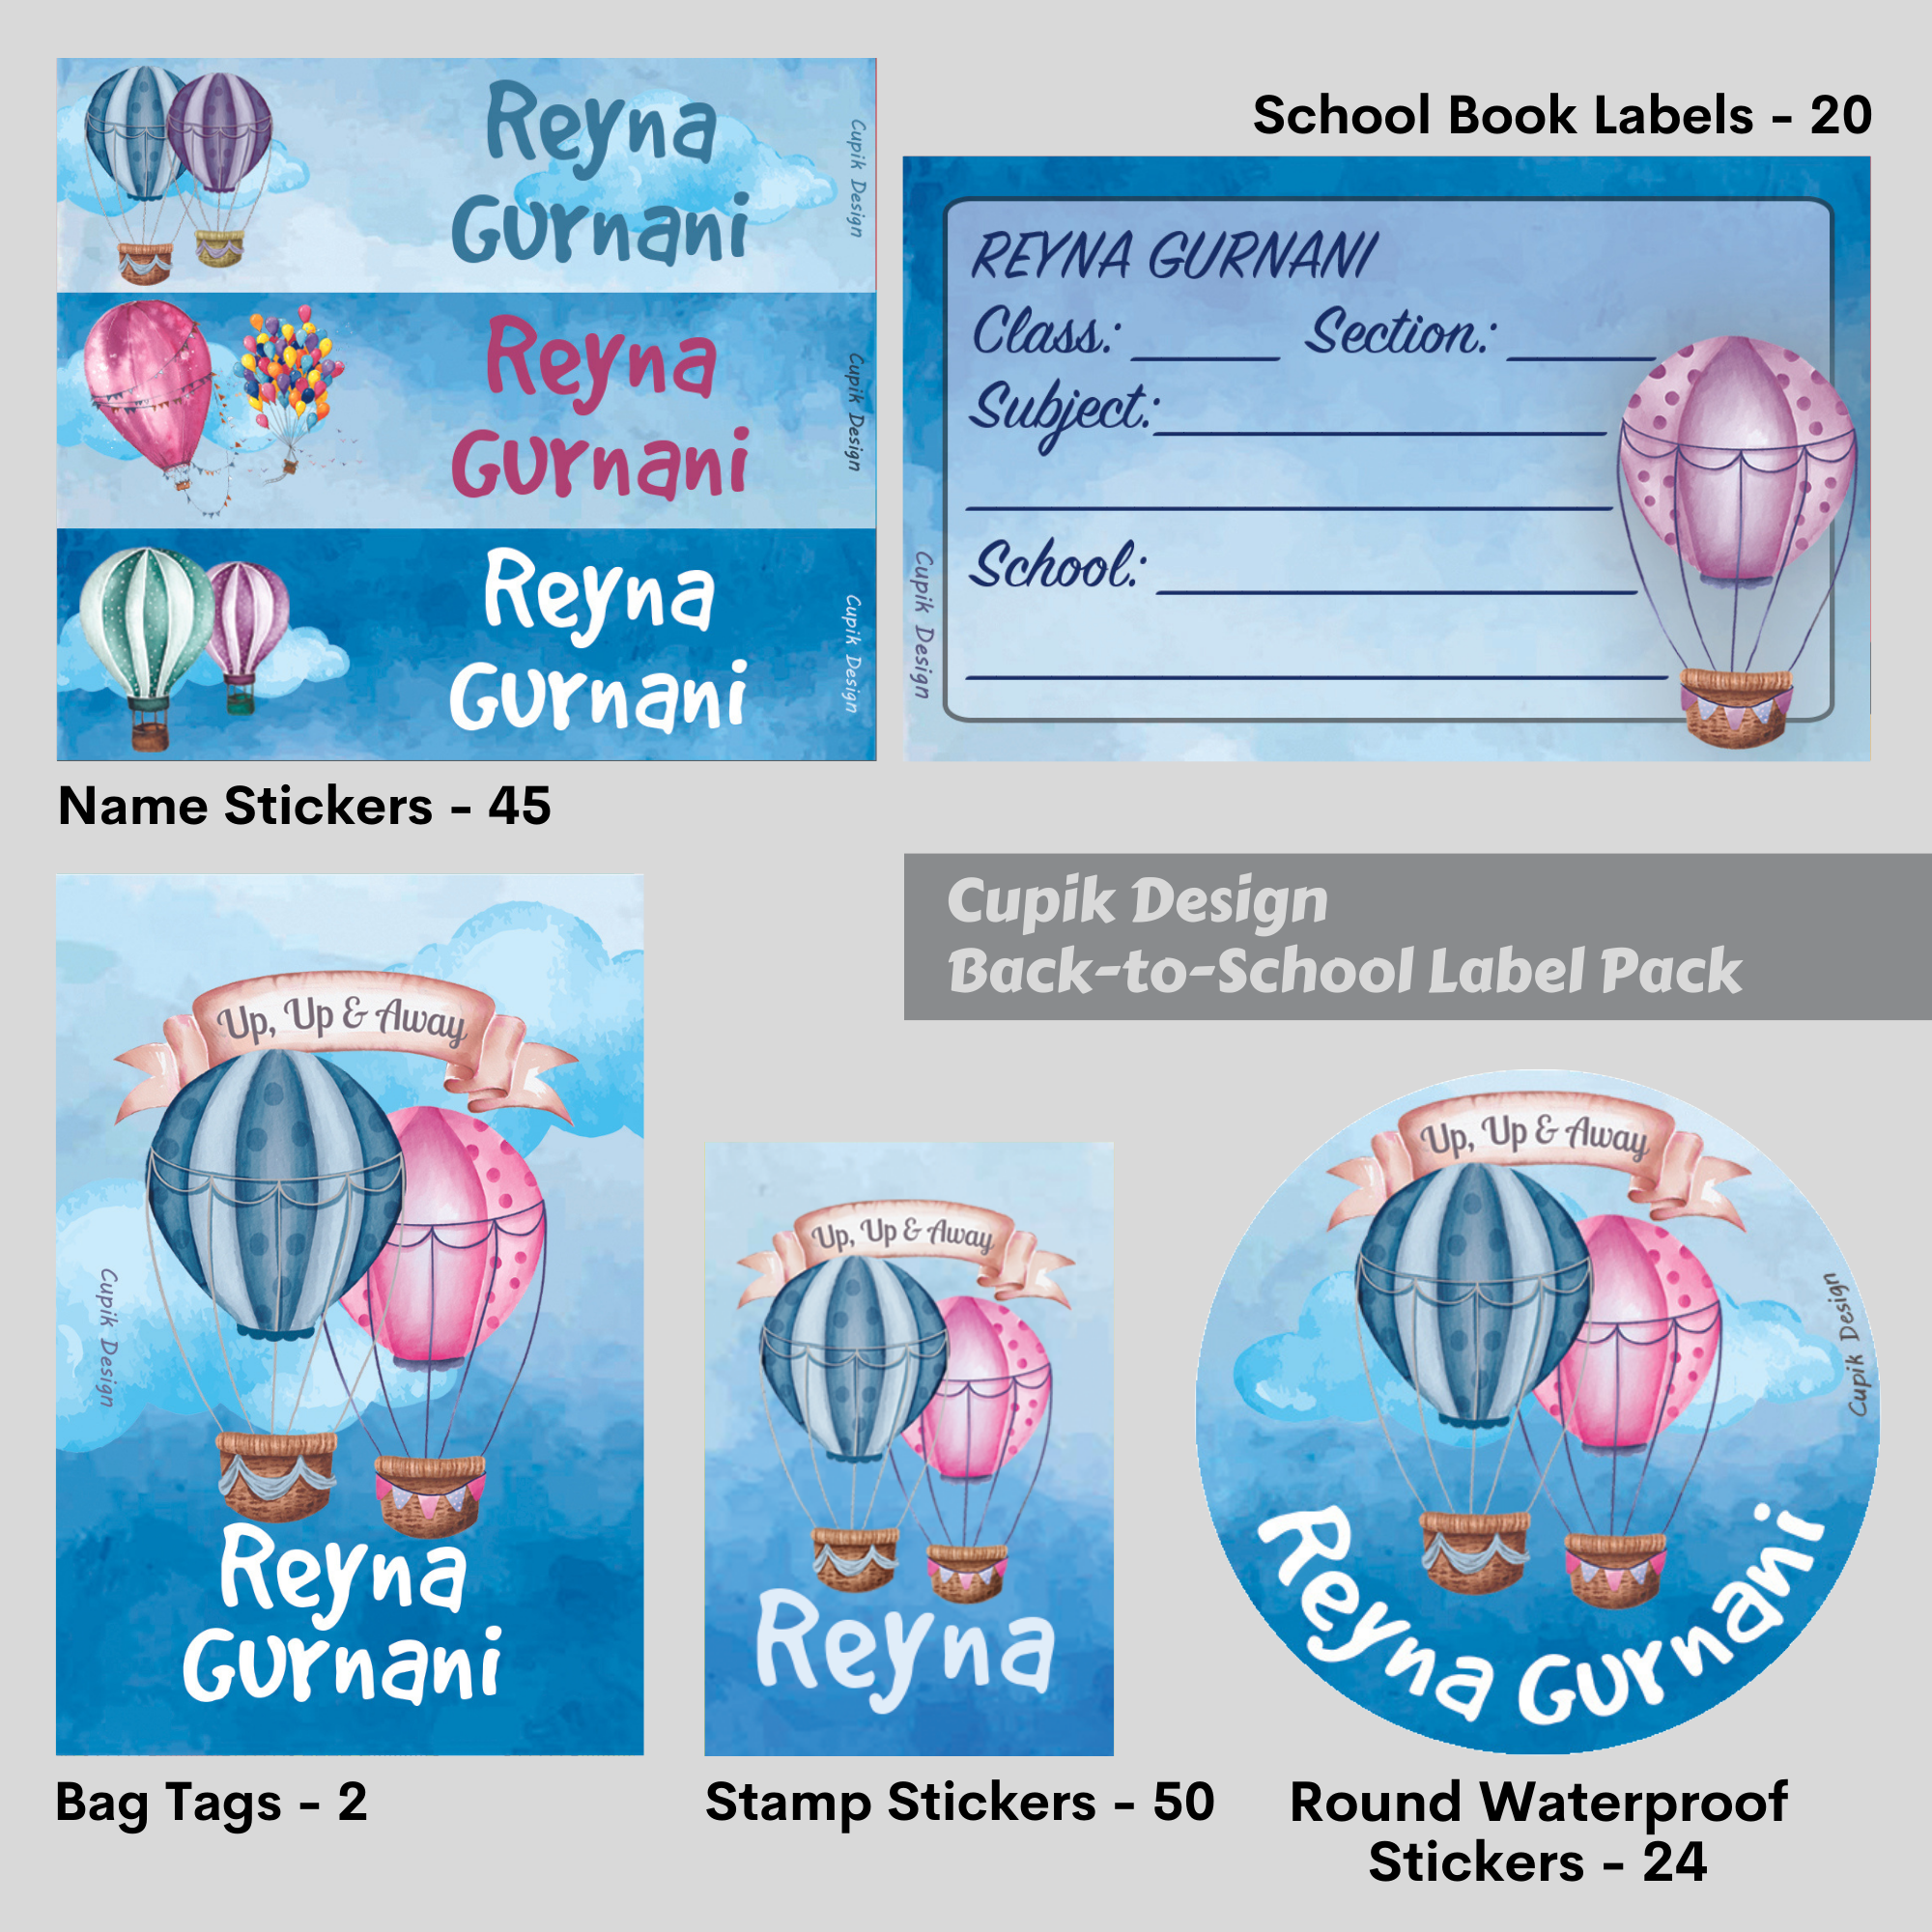 Hot Air Balloon - Back to School Label Pack